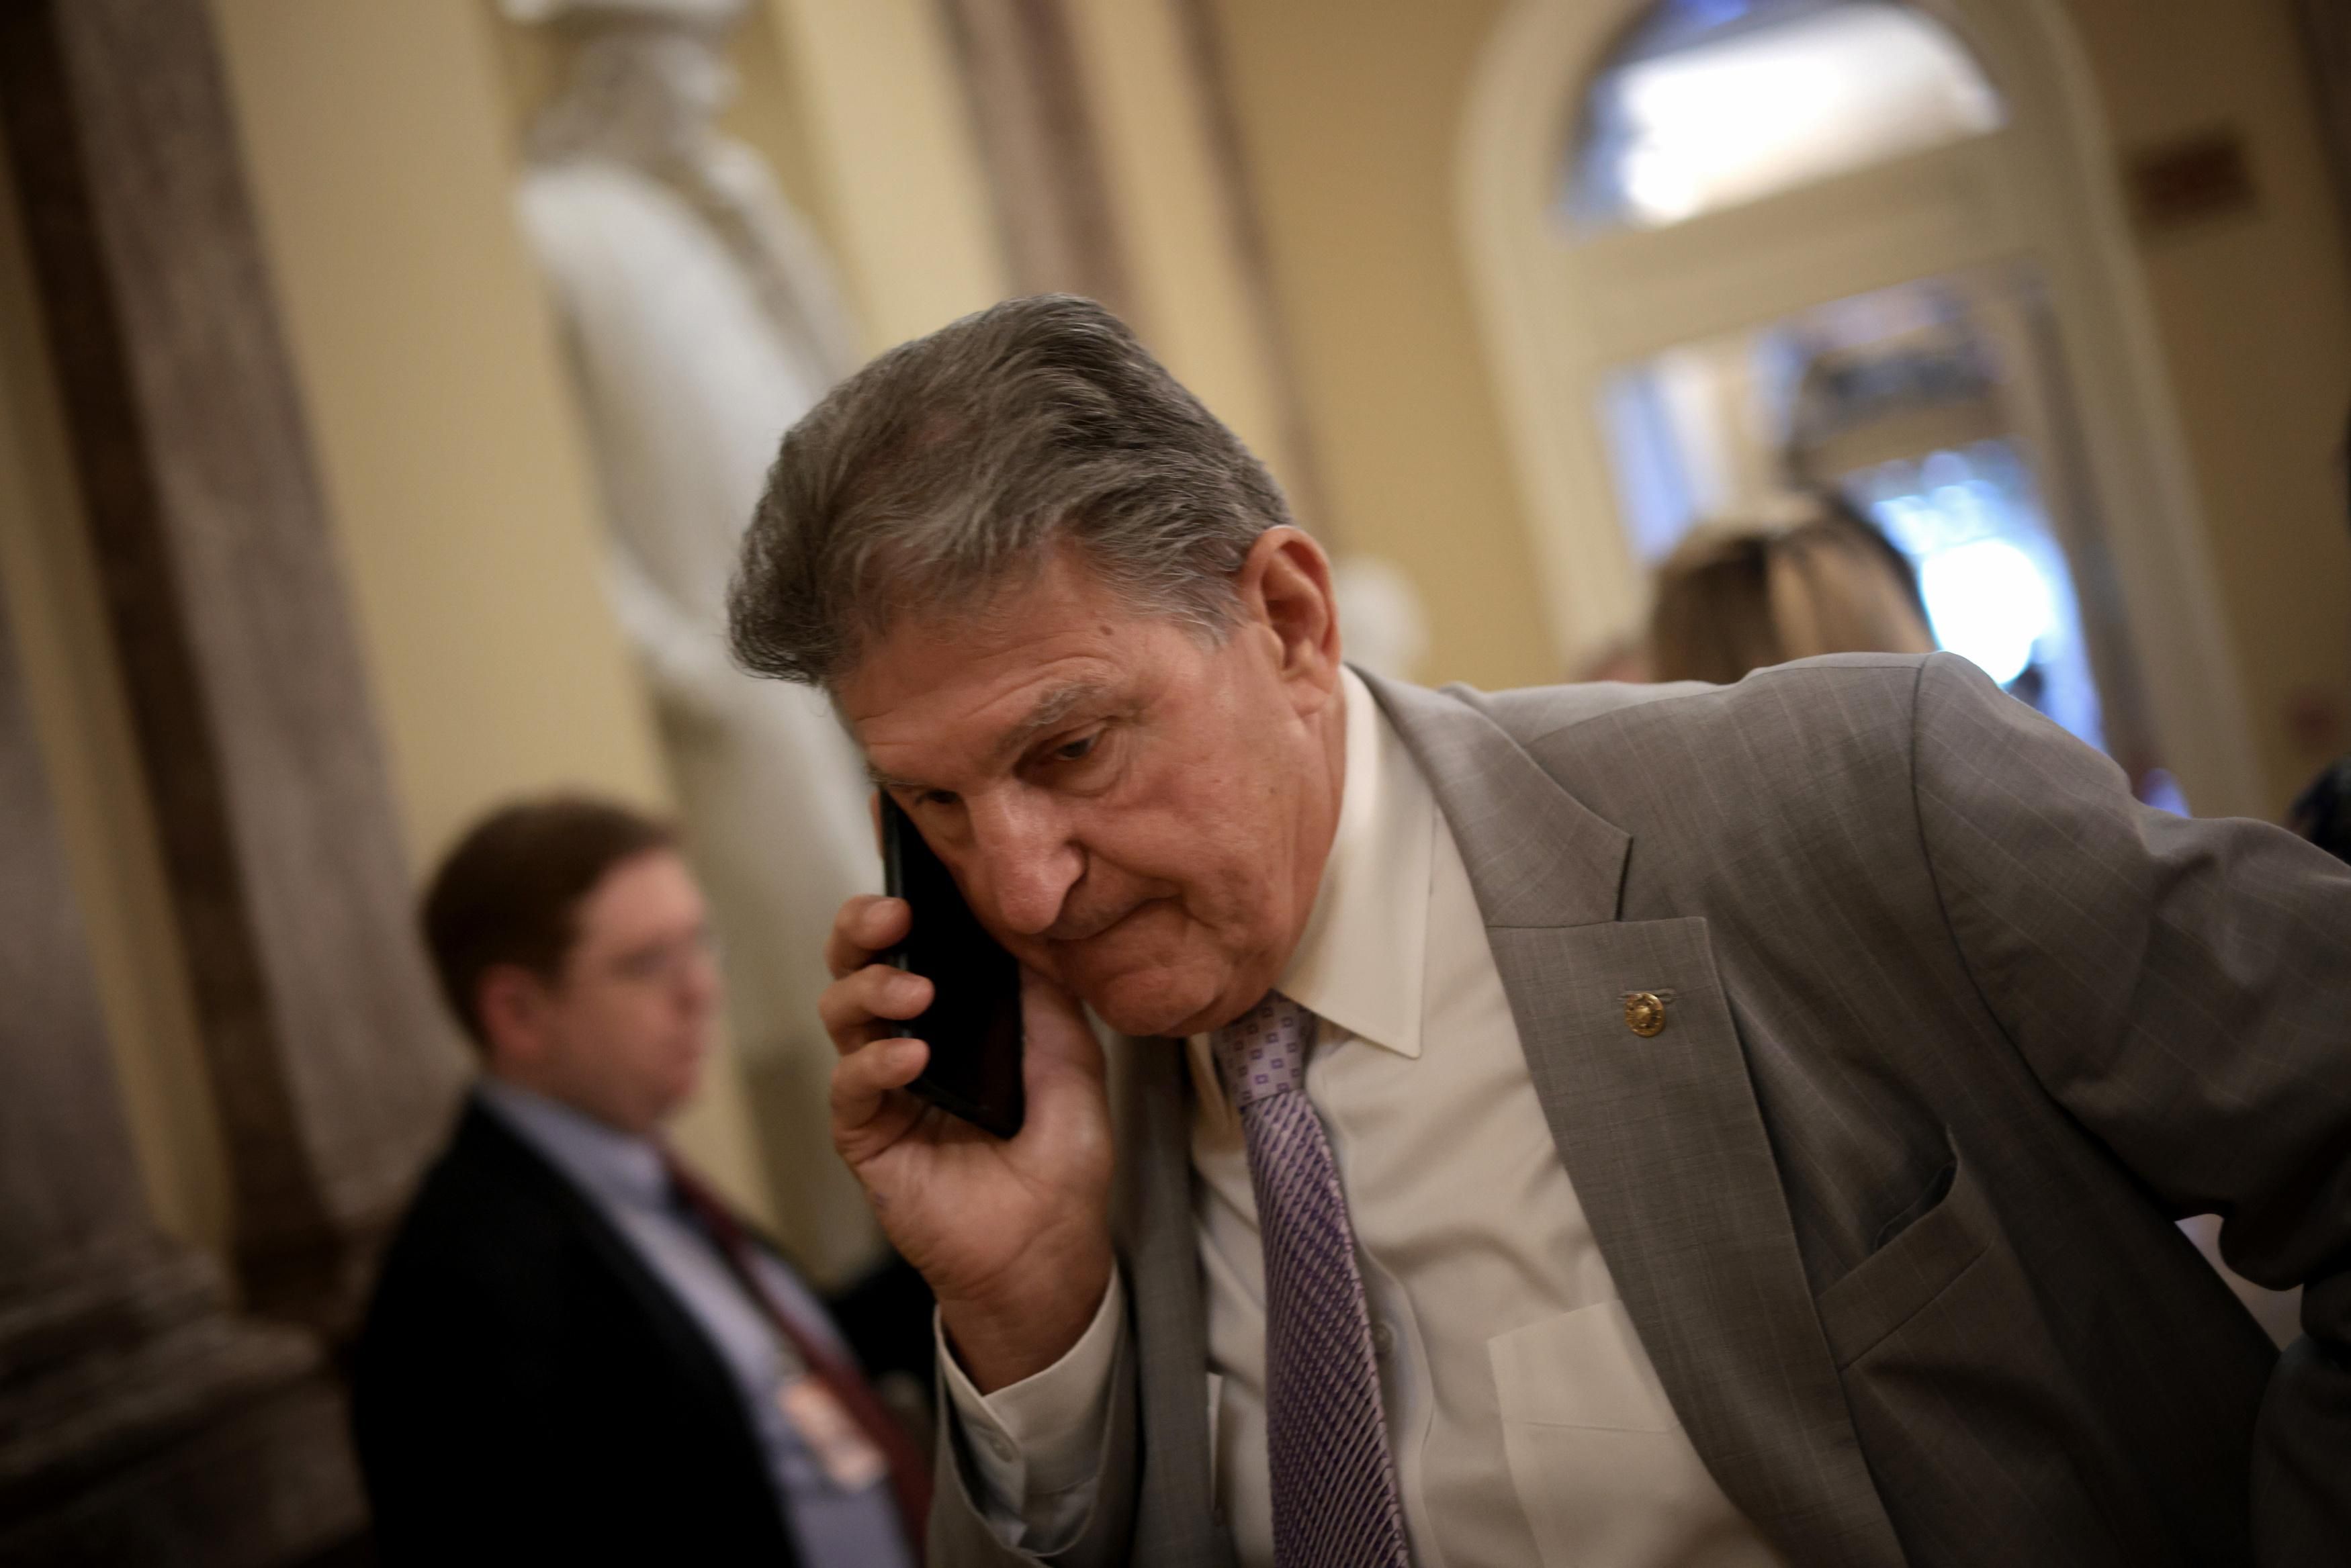 Sen. Joe Manchin (D-W.Va.) arrives for a bipartisan meeting on infrastructure legislation at the U.S. Capitol on July 13, 2021 in Washington, D.C. (Photo: Win McNamee via Getty Images)